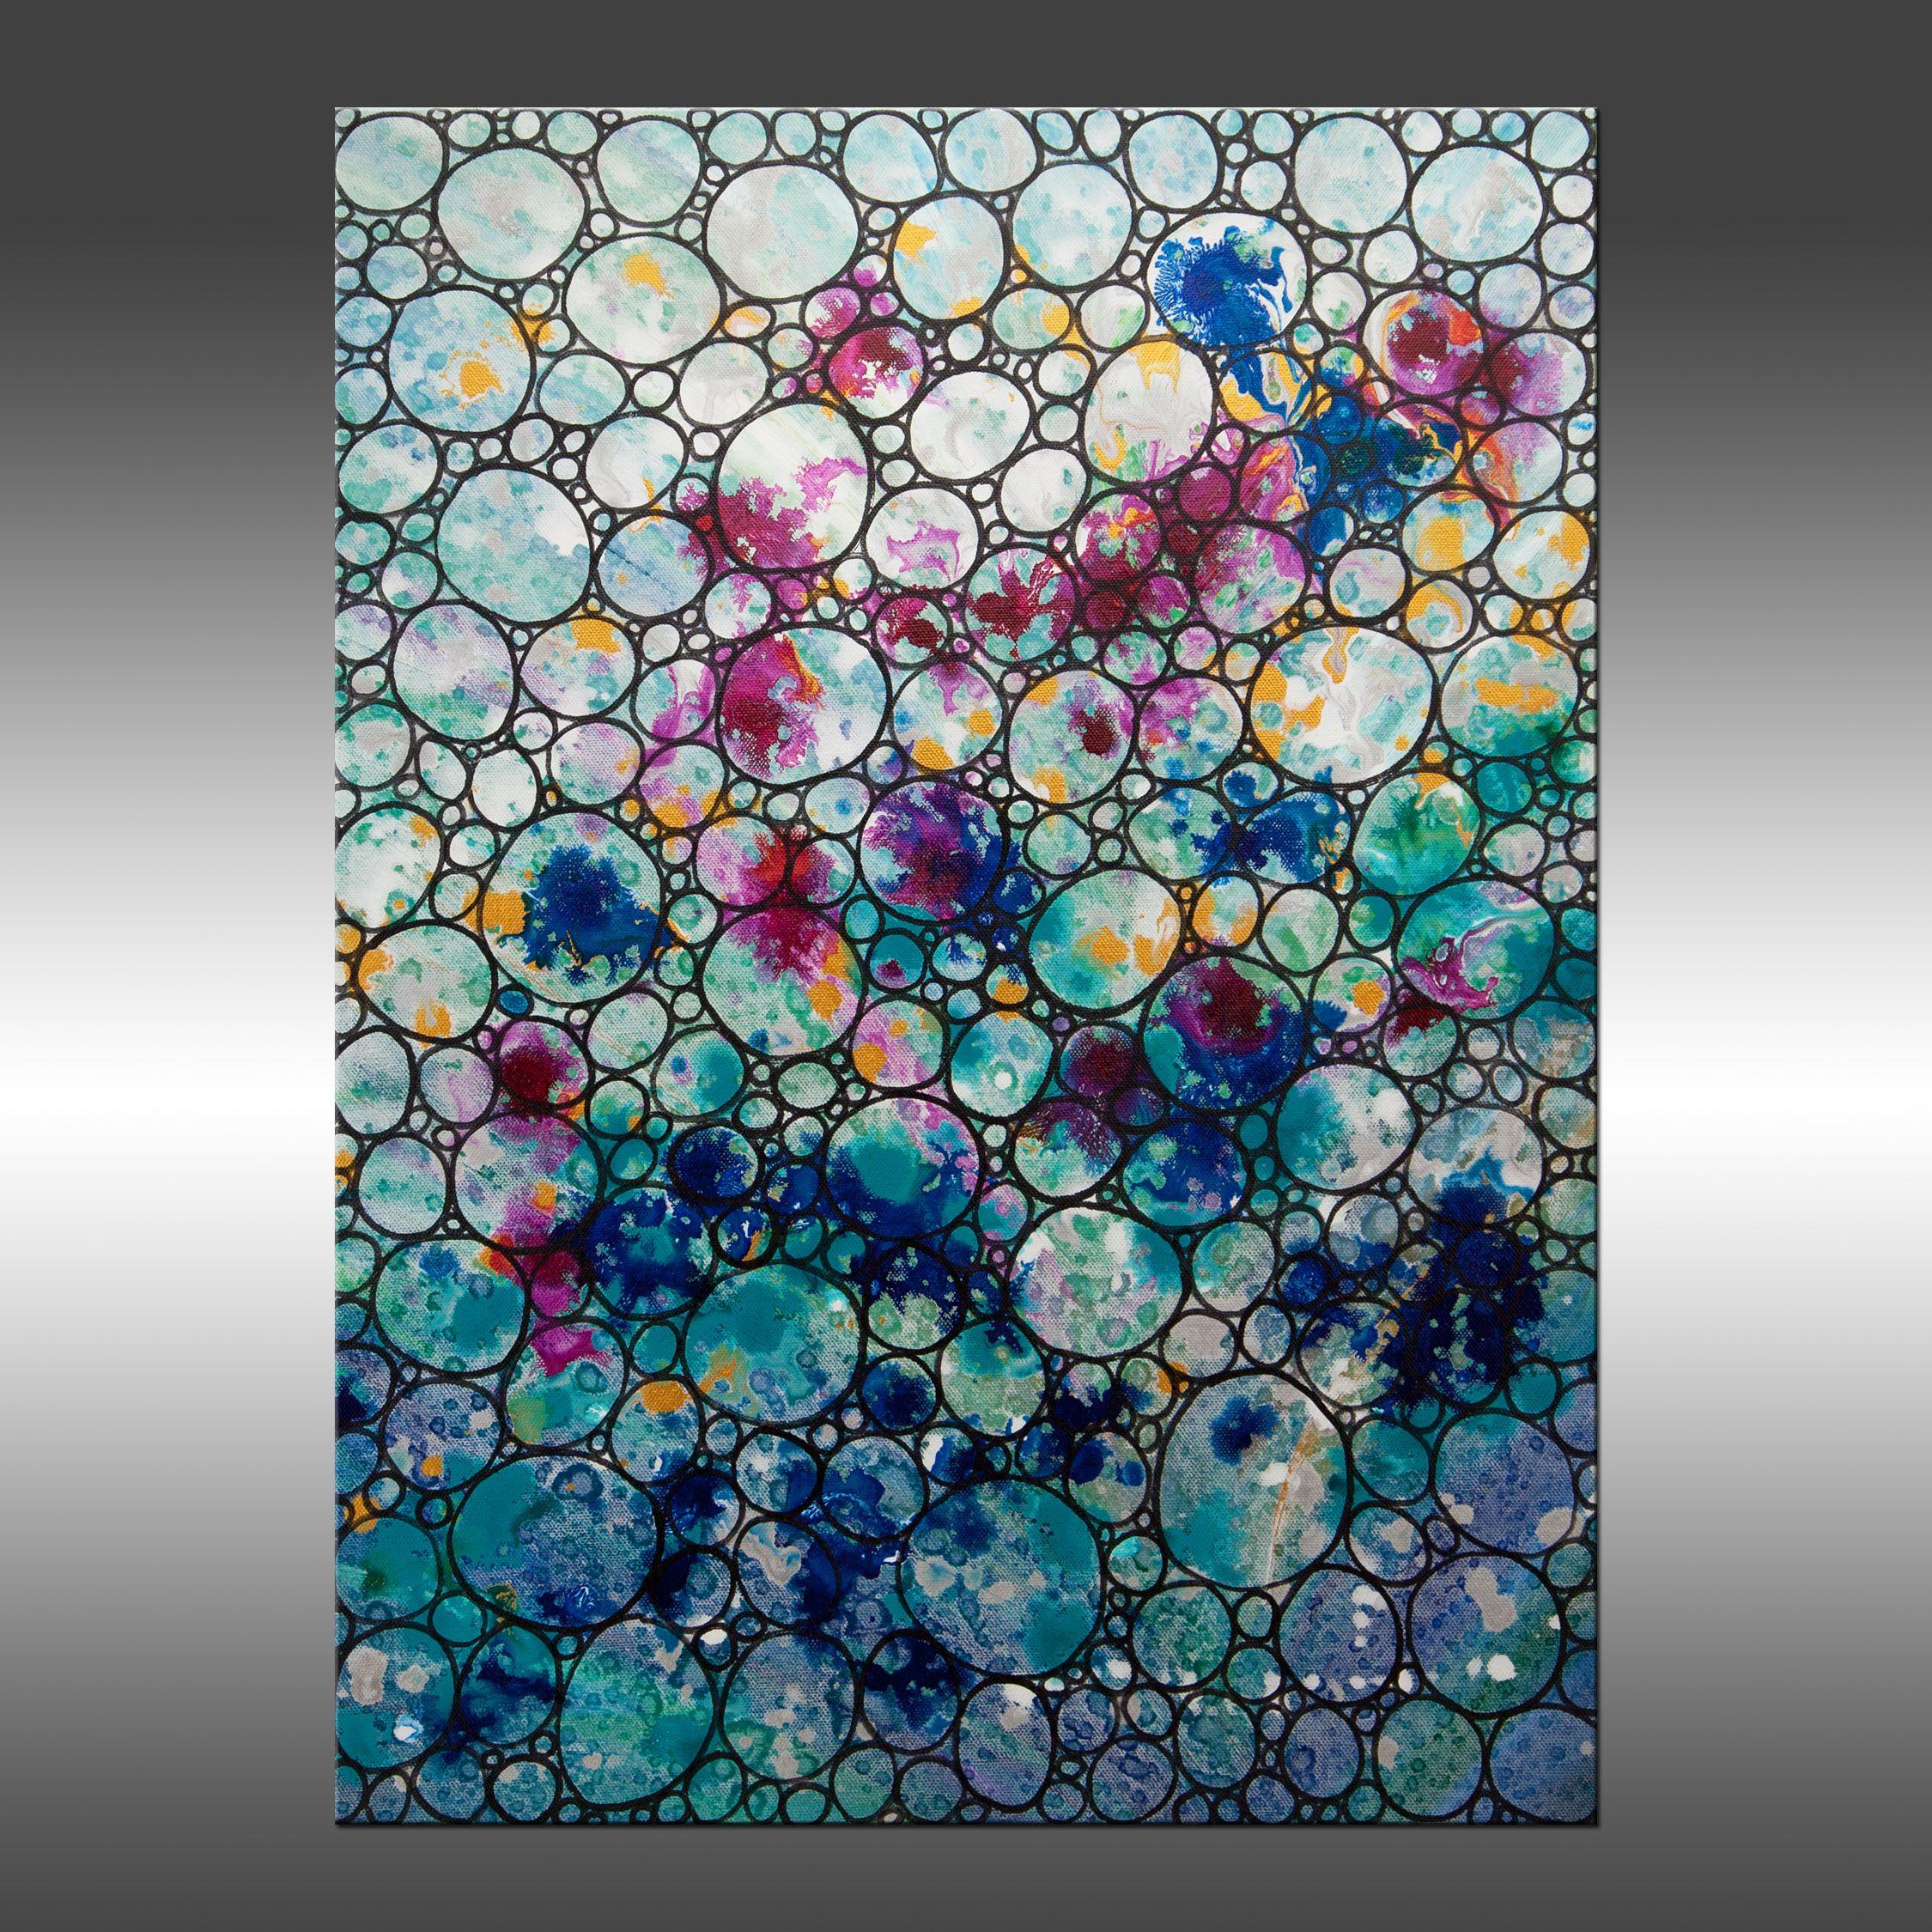 Dimension 35 is an original painting, created with acrylic paint on gallery-wrapped canvas. It has a width of 18 inches and a height of 24 inches with a depth of 1.5 inches (18x24x1.5).     The colors used in the painting are gray, white, teal,